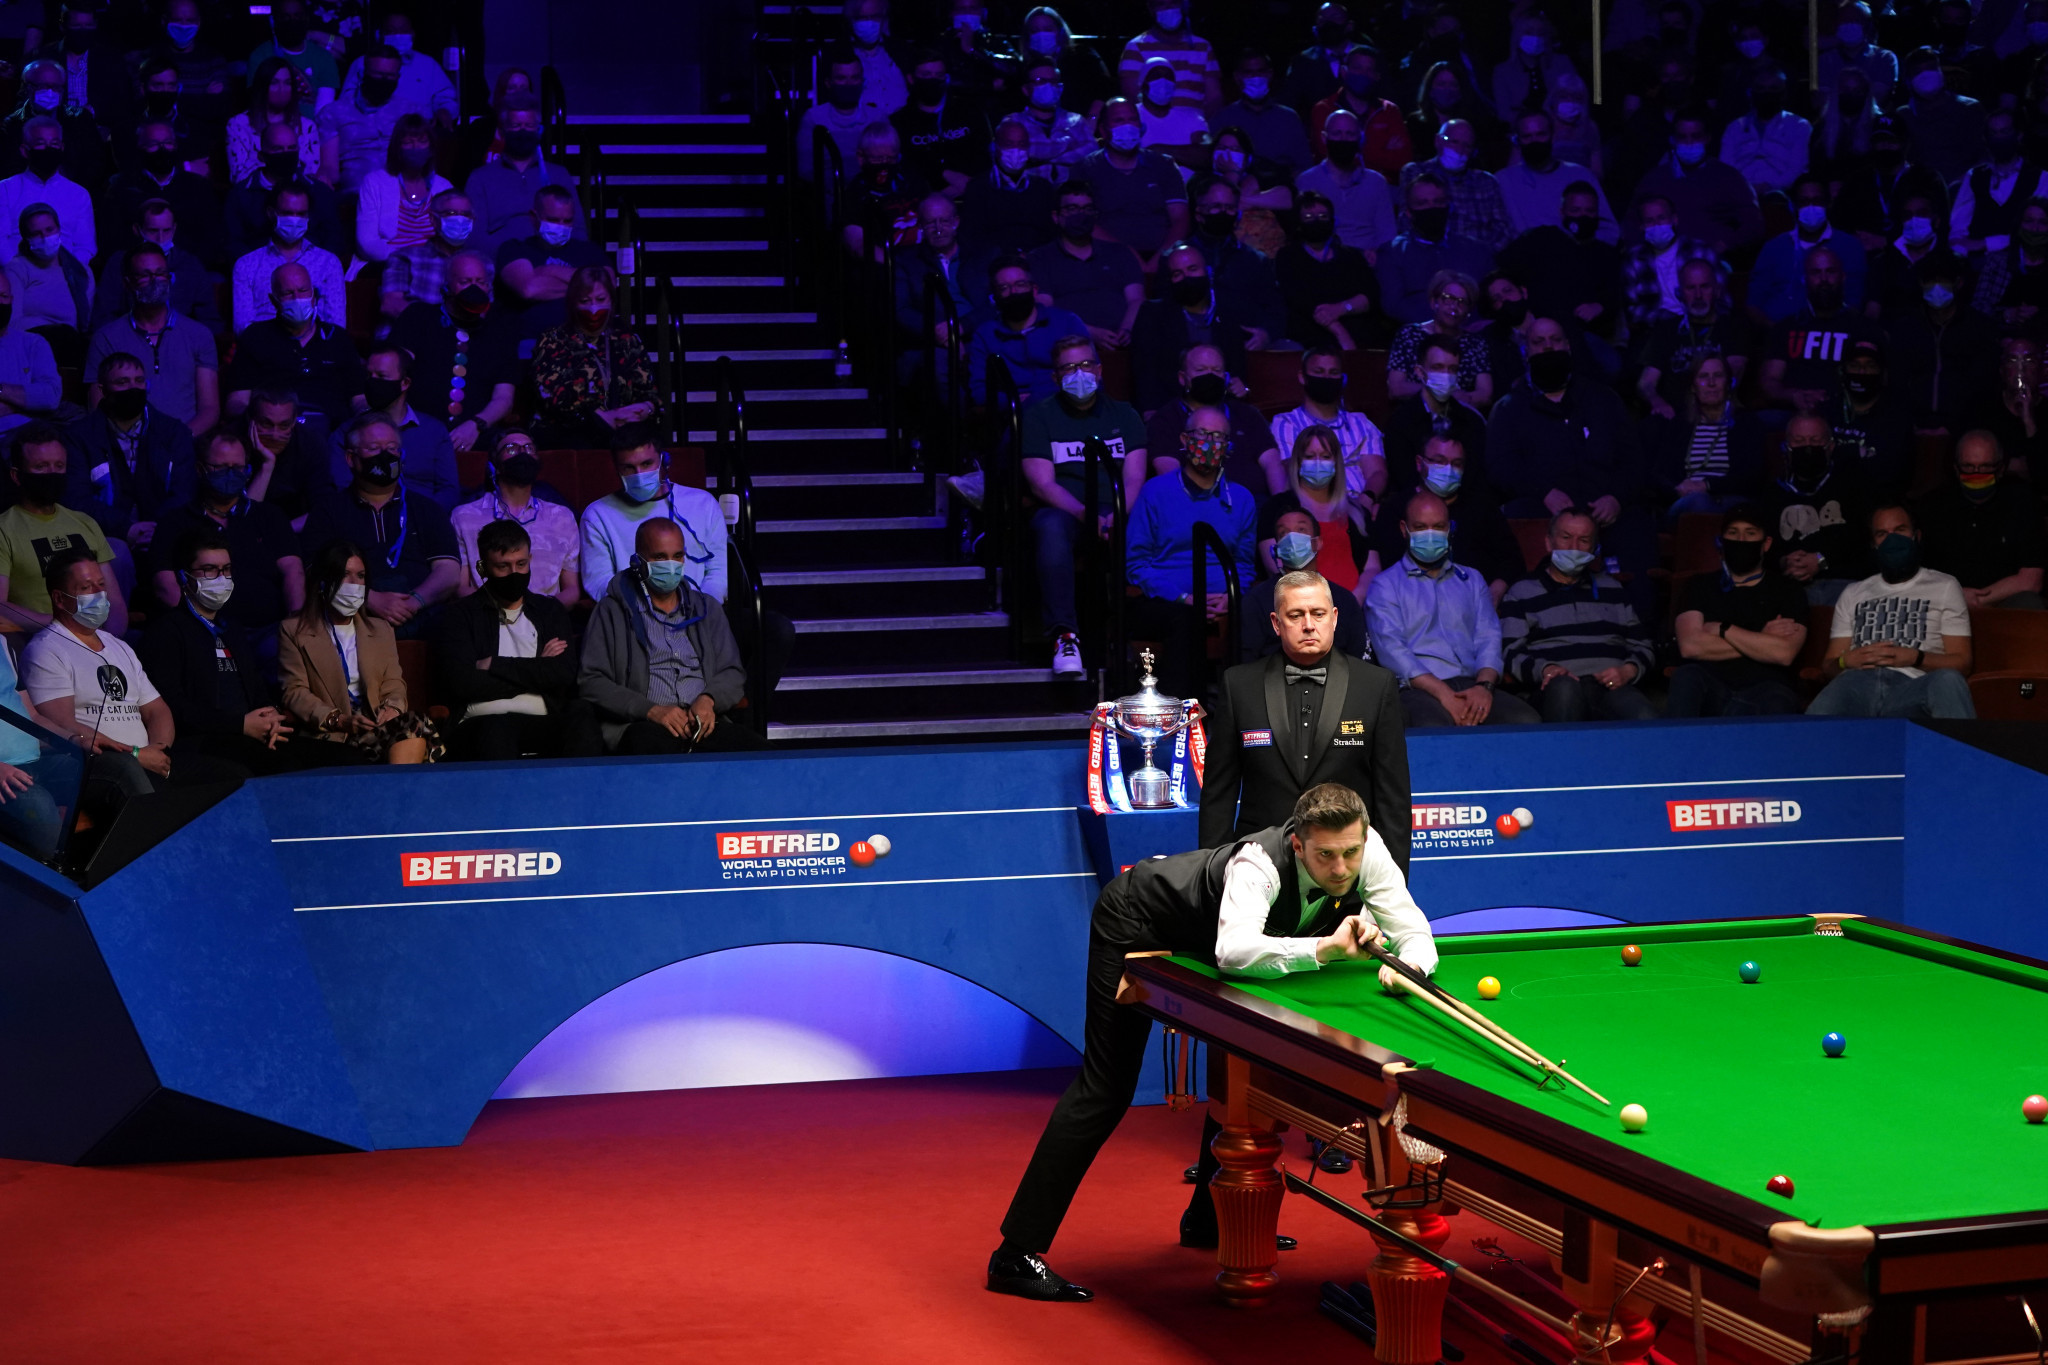 Selby battles into three frame lead against Murphy after opening day of World Snooker Championship final